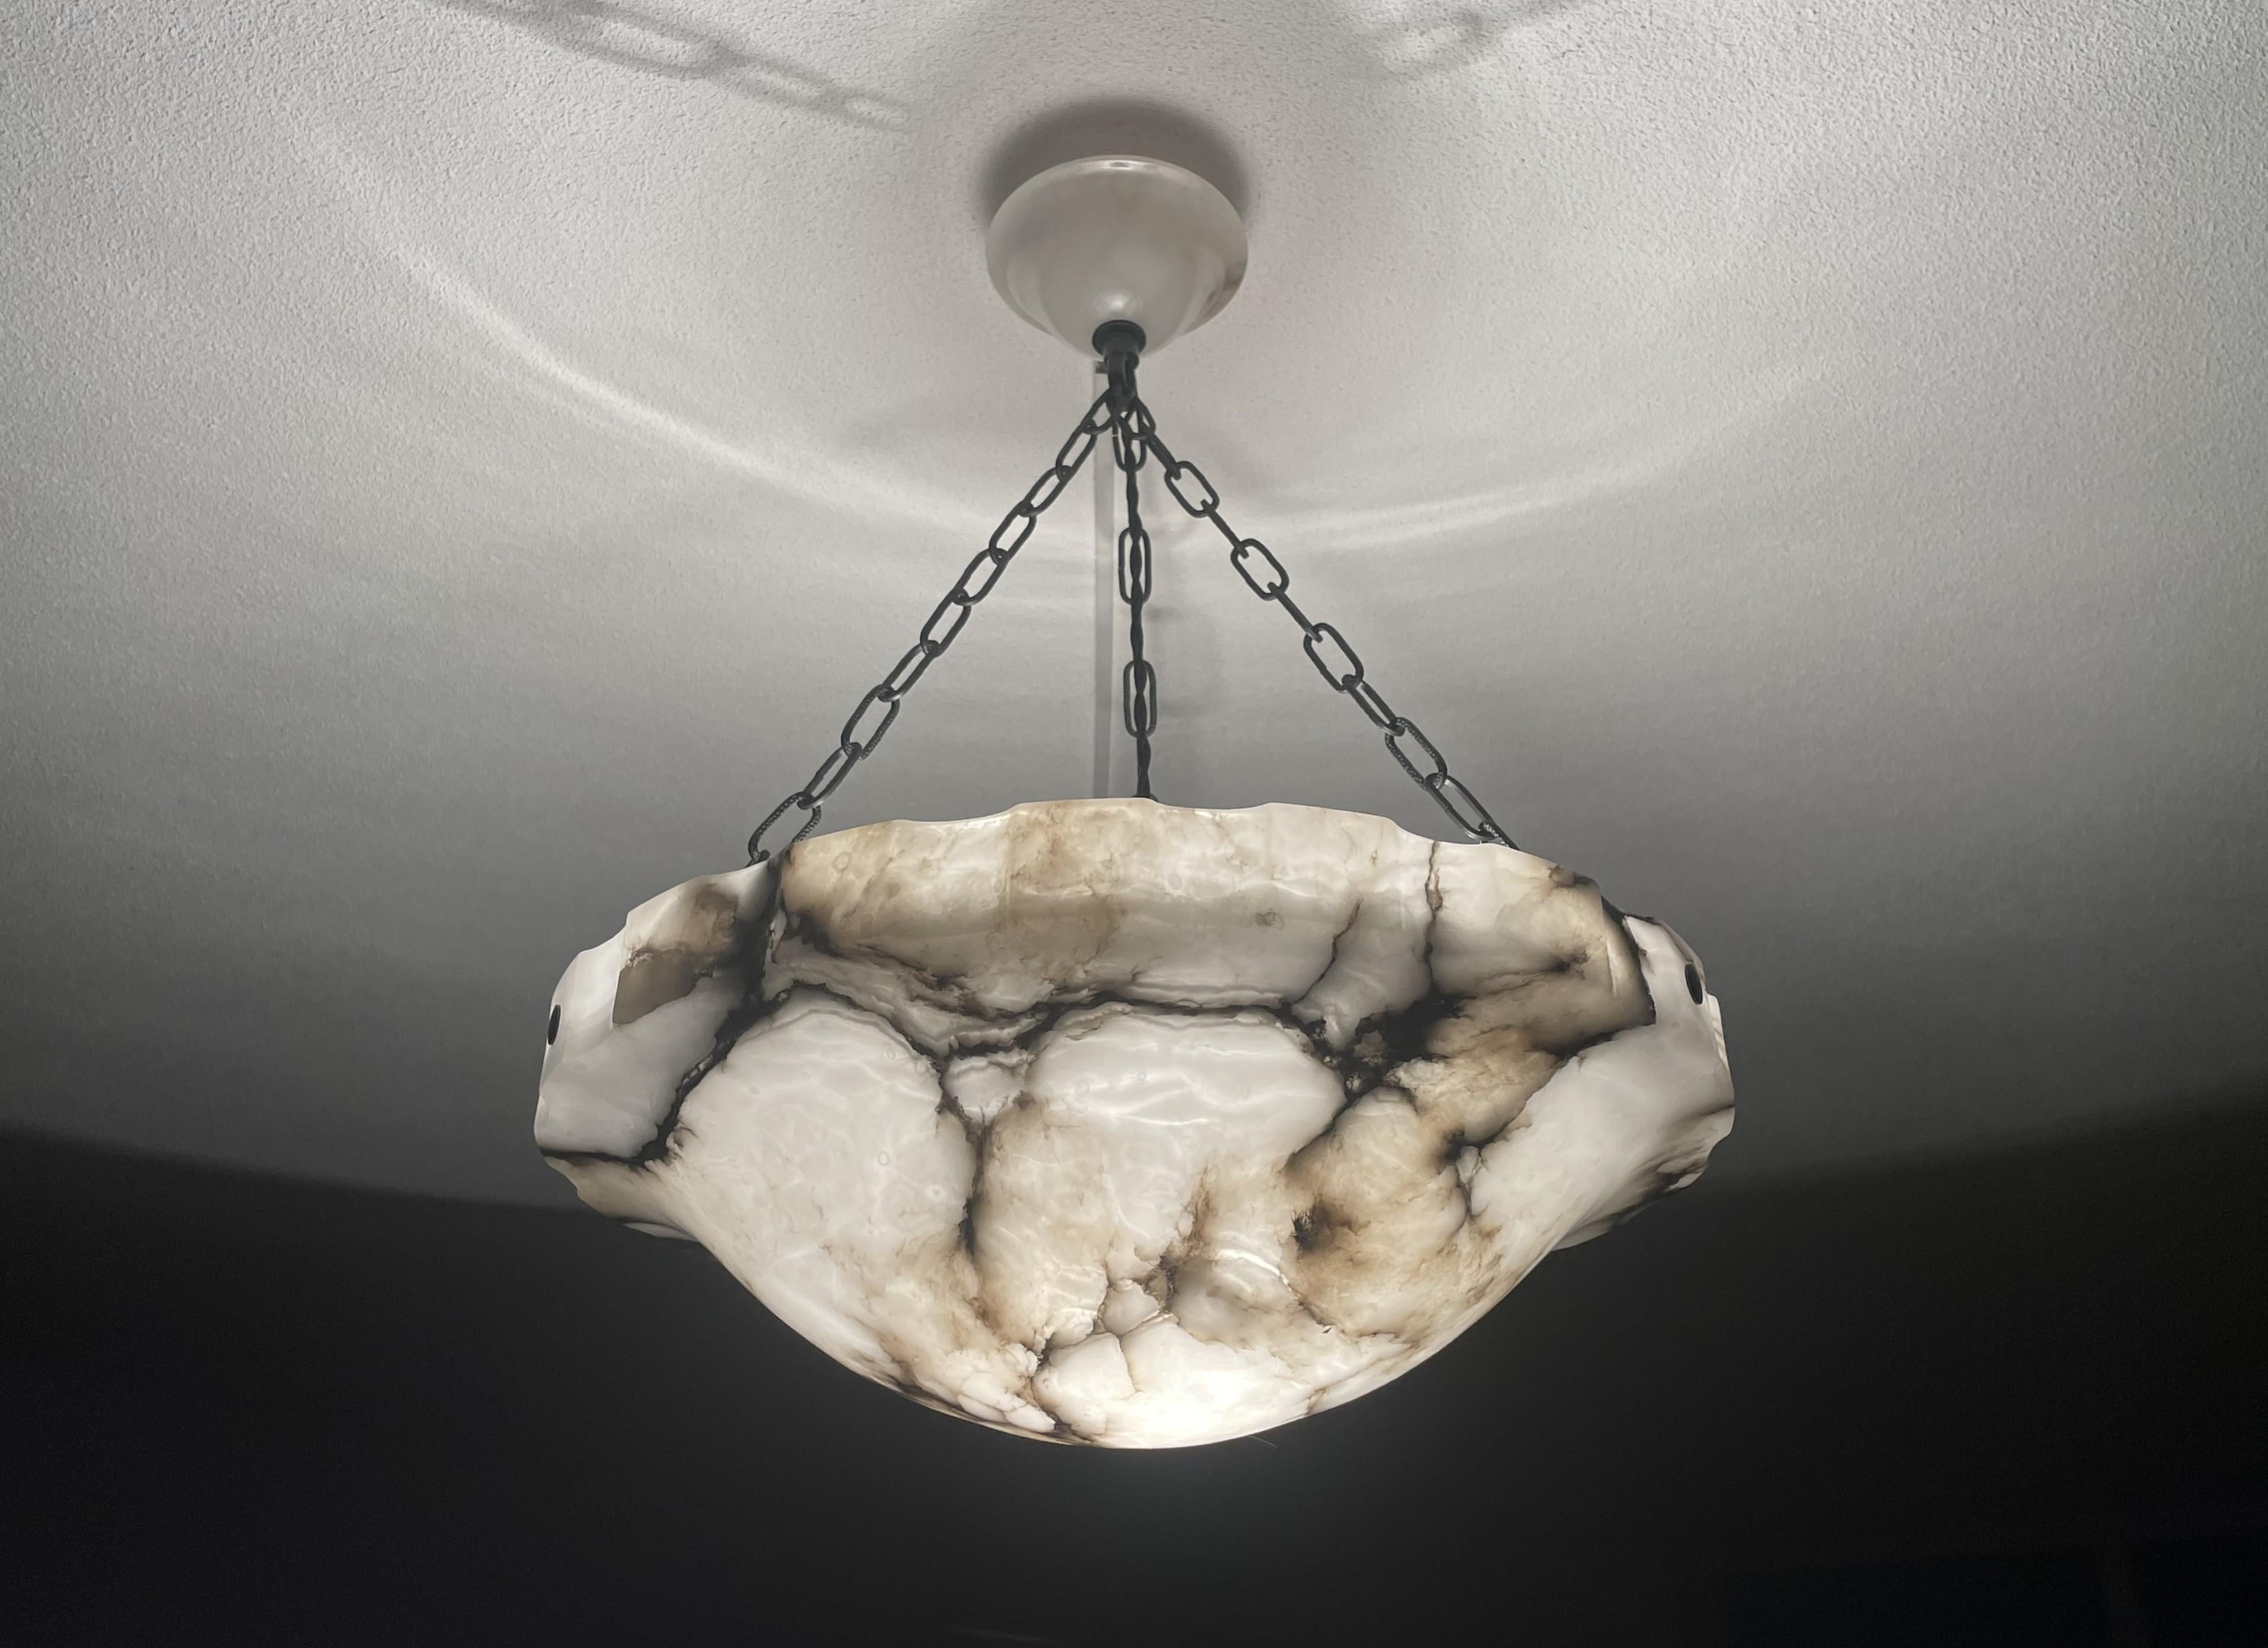 Wonderful Art Deco alabaster pendant in mint condition.

Over the years we have sold some of the best looking and best condition alabaster pendants that money can buy. This perfectly white with black veins alabaster fixture is another one of those